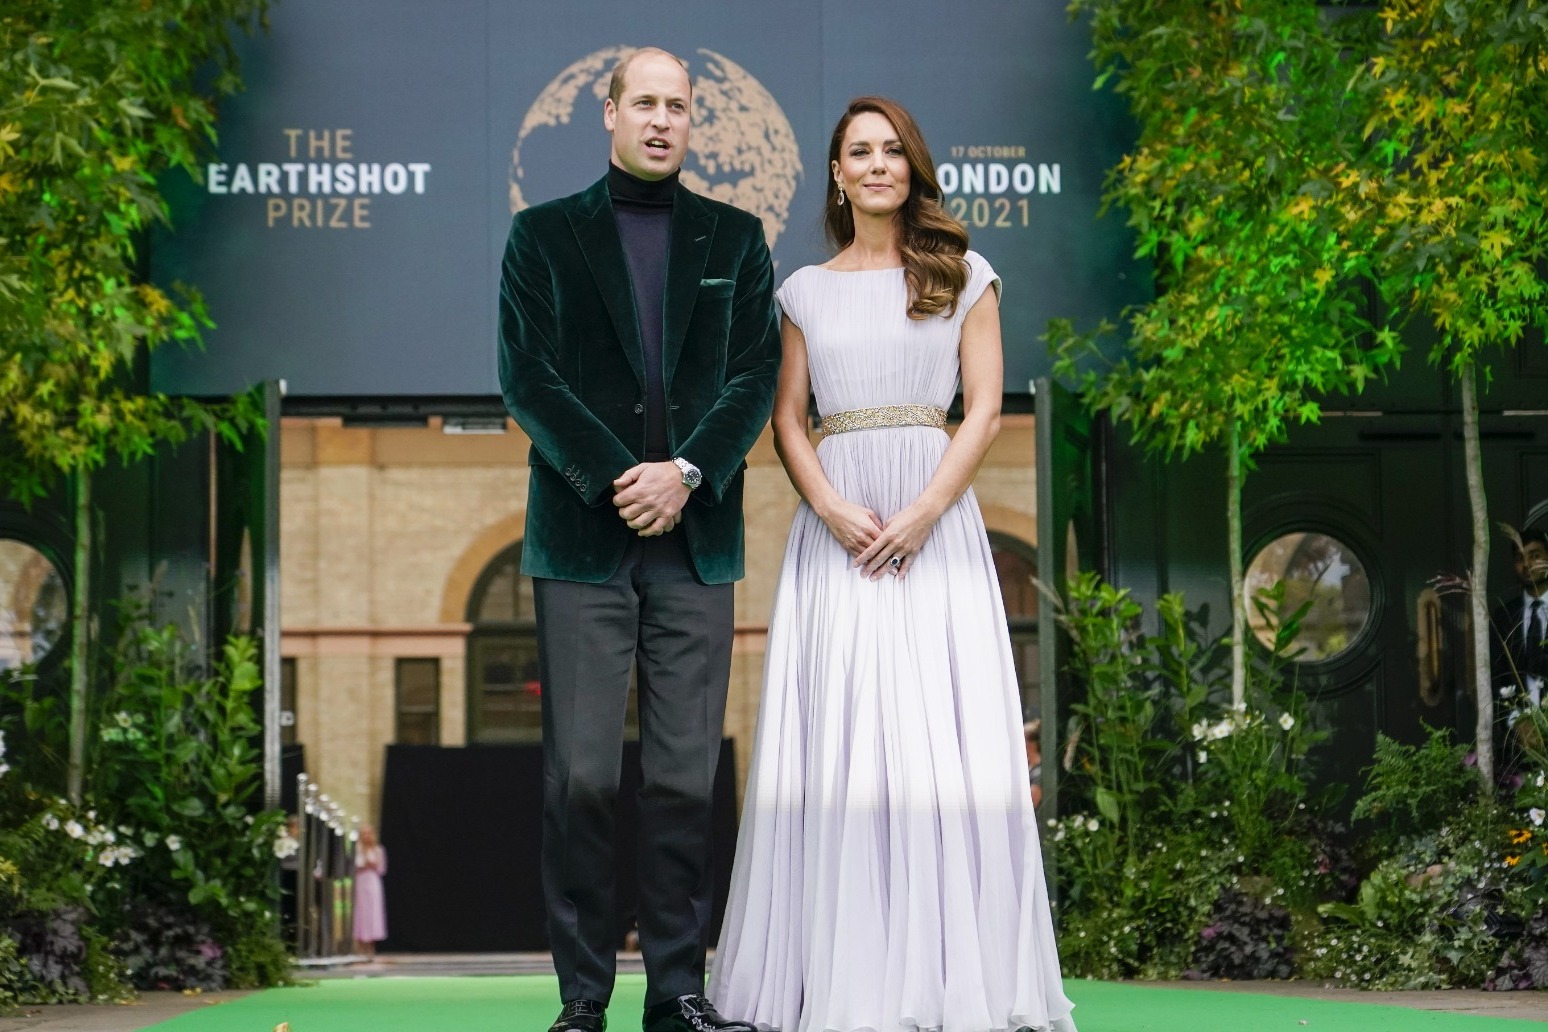 William to visit New York to address Earthshot Prize innovation summit 